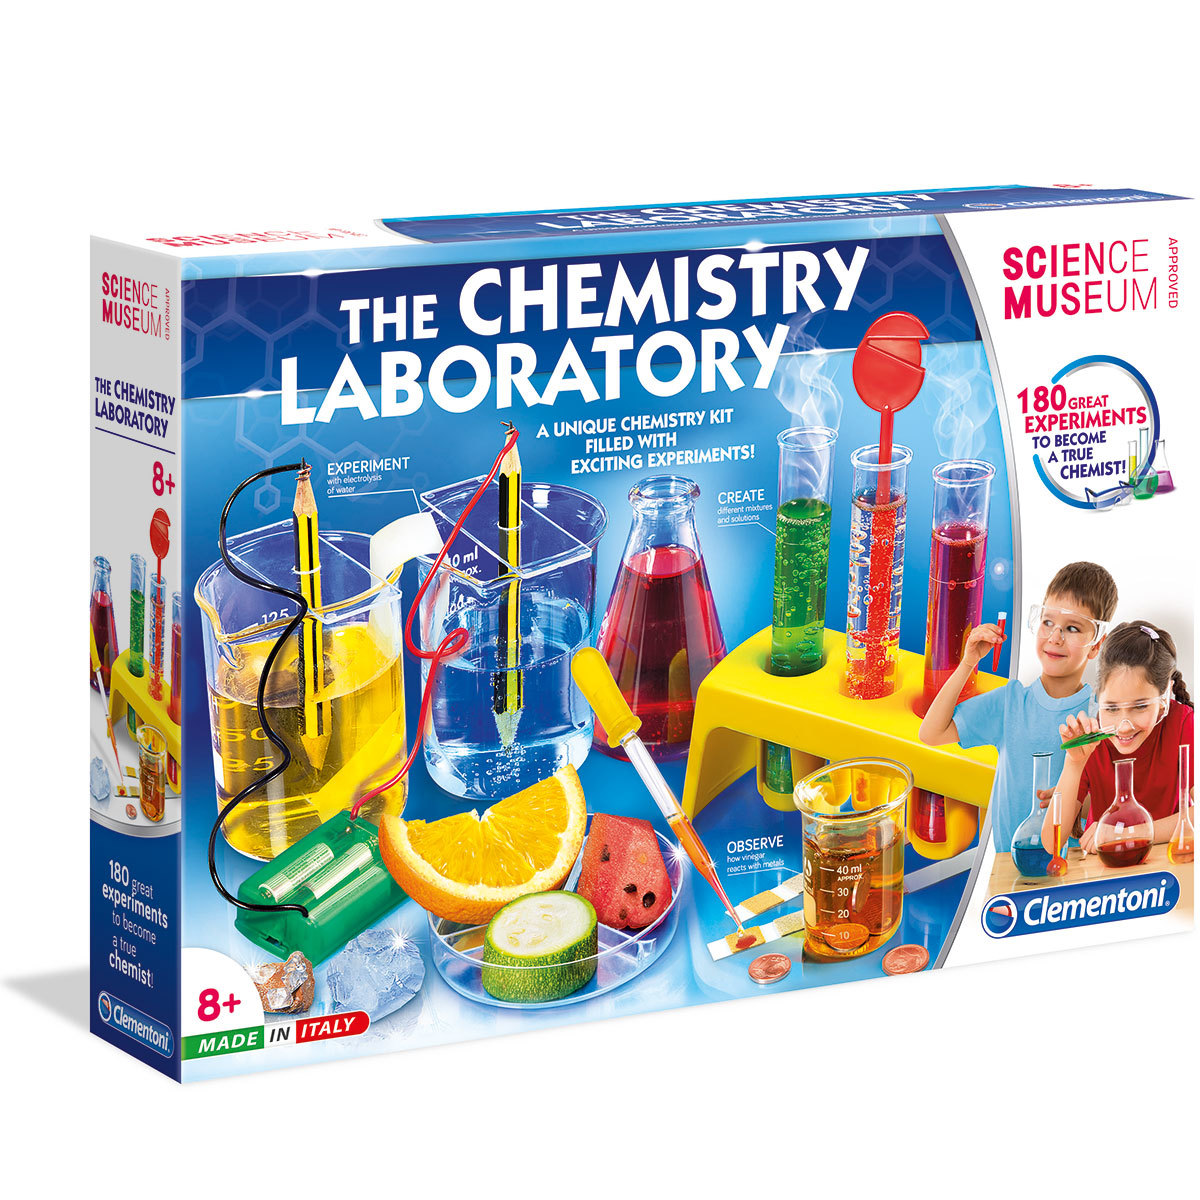 The Chemistry laboratory boxed image